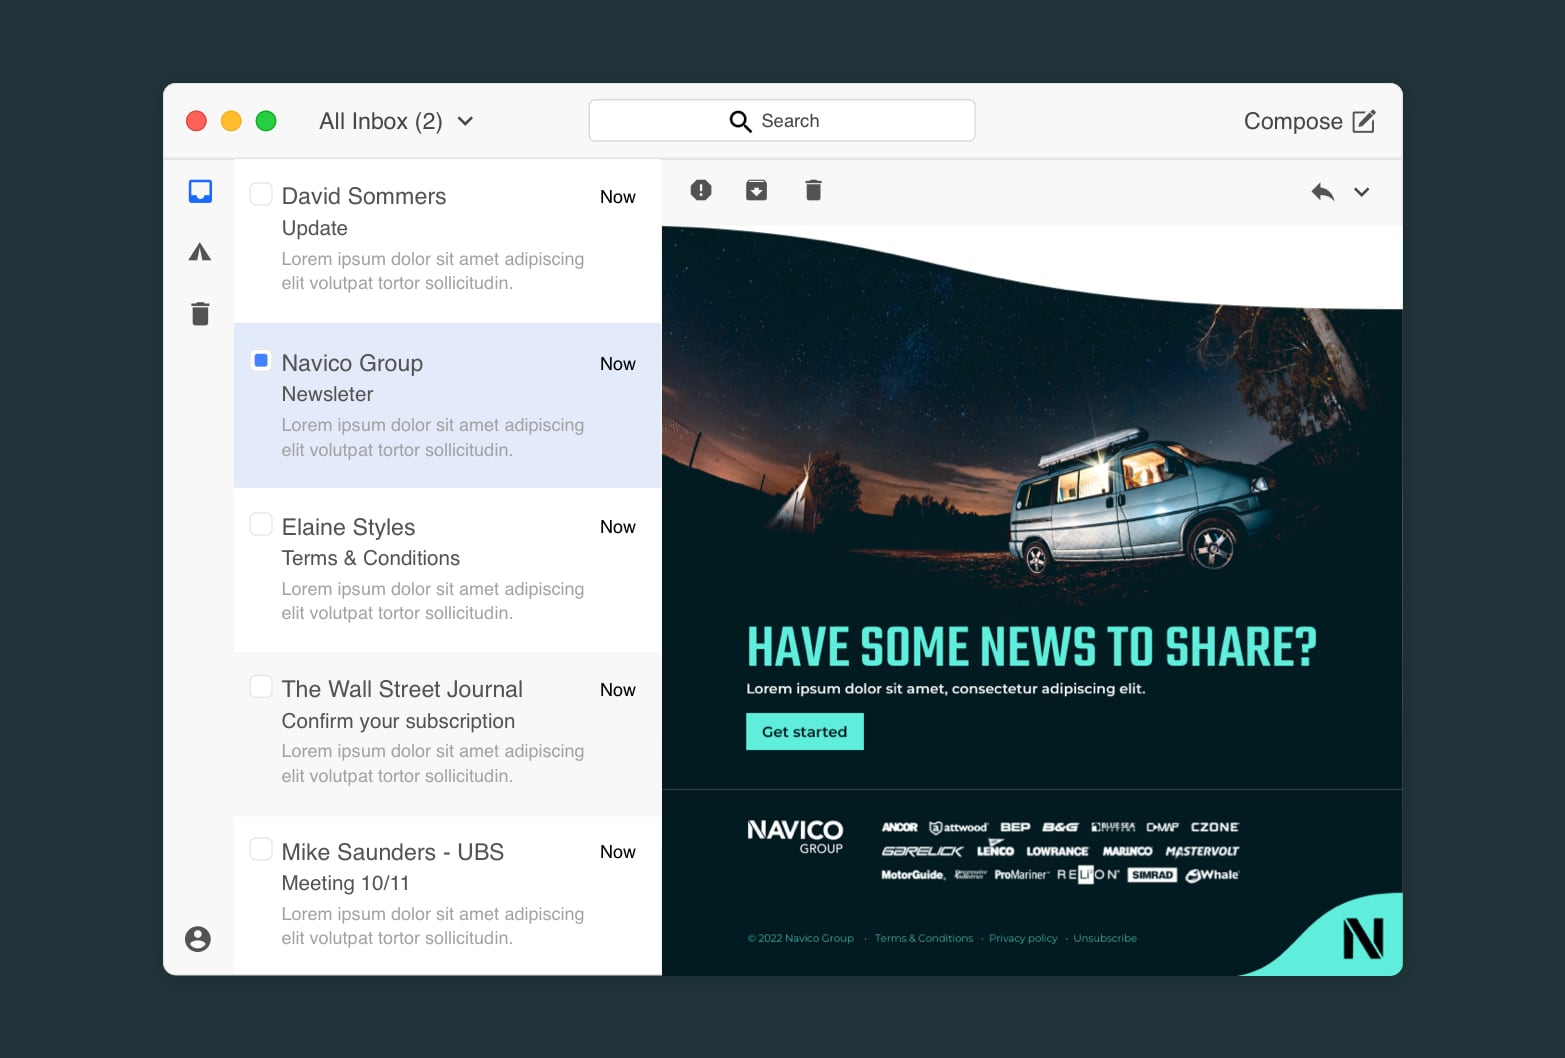 An example Navico News email showing inside an email application